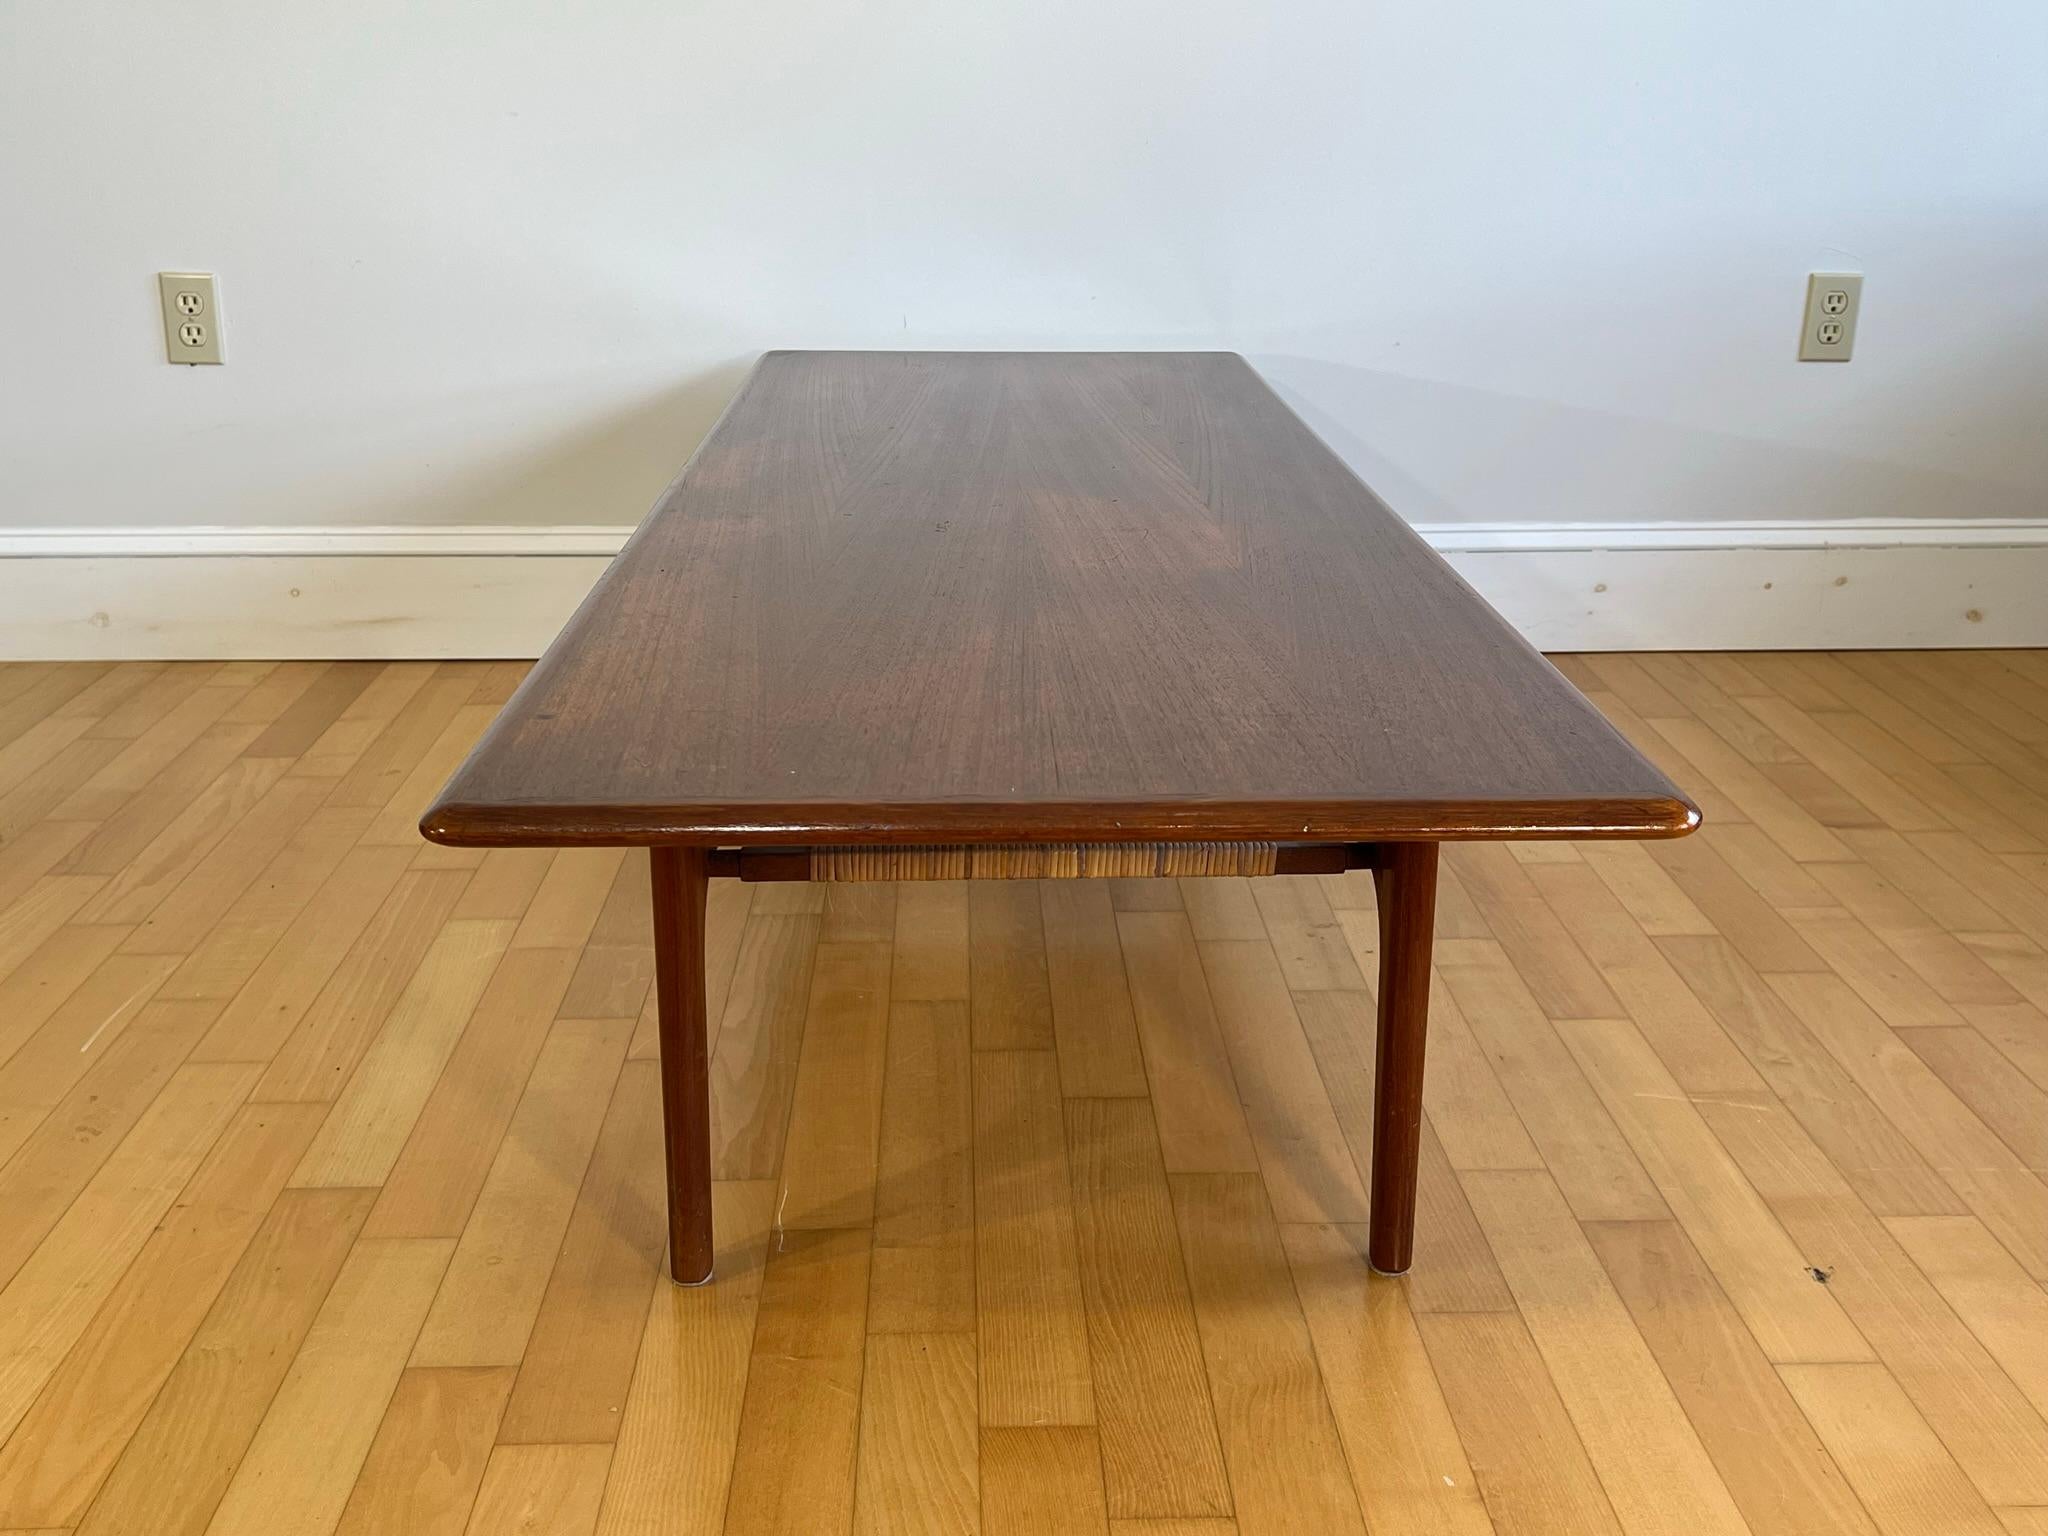 Mid-20th Century Danish Modern Teak and Cane Coffee Table, attrib. to Trioh, Denmark, 1960s For Sale